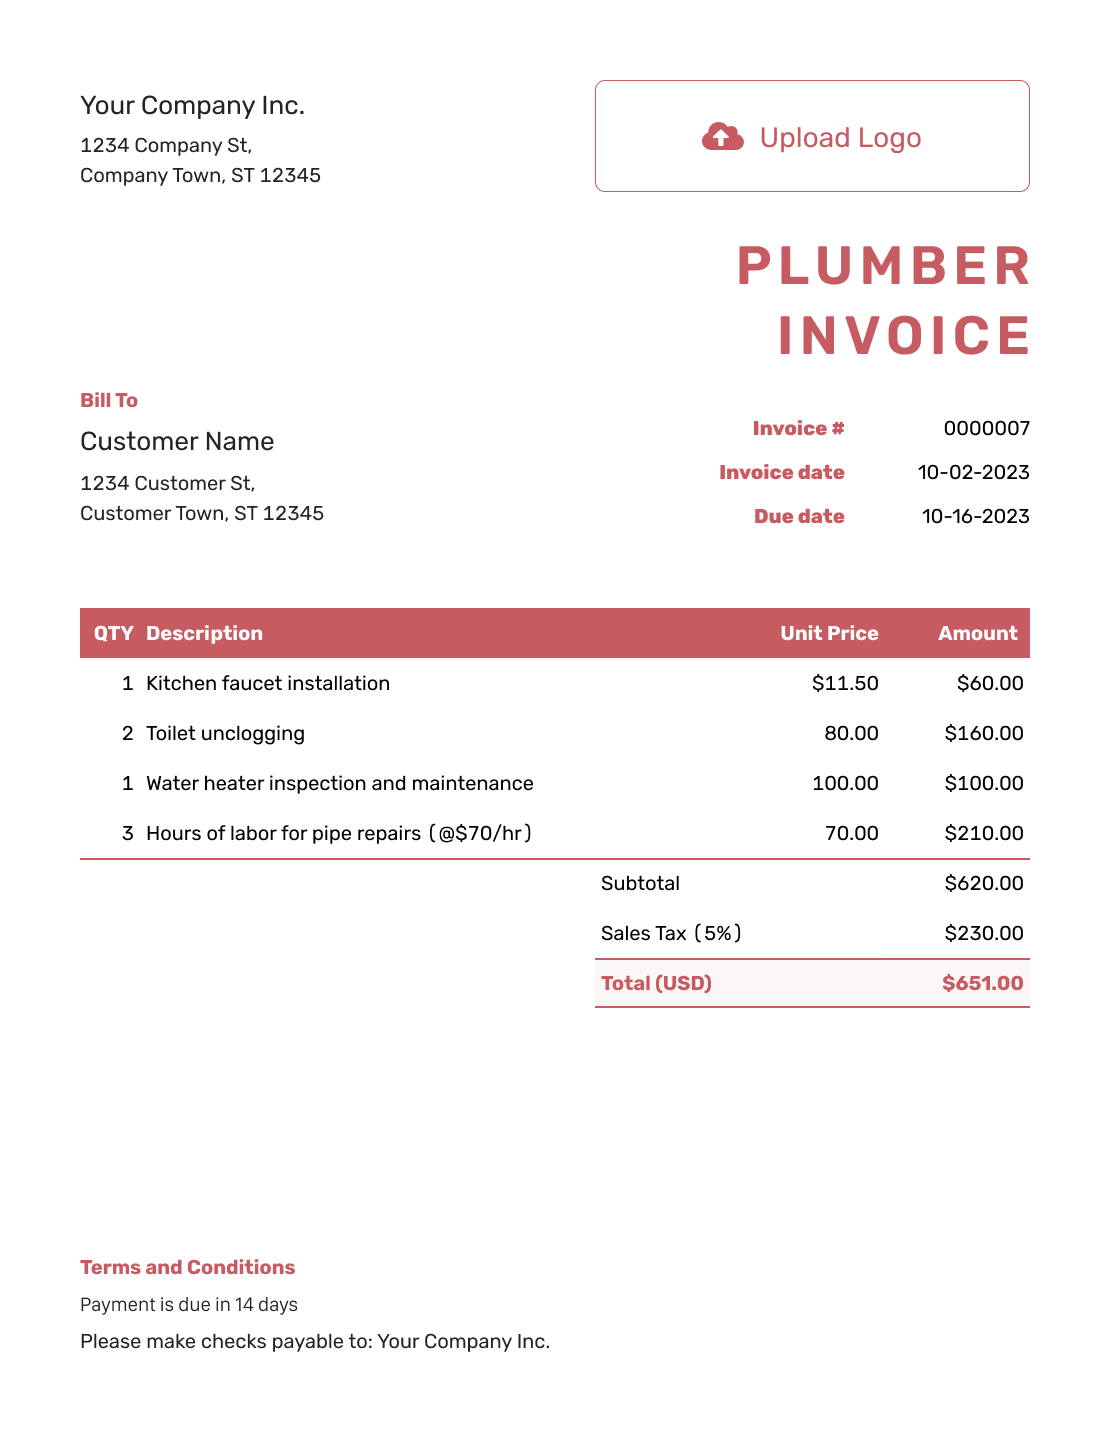 Itemized Plumber Invoice Template